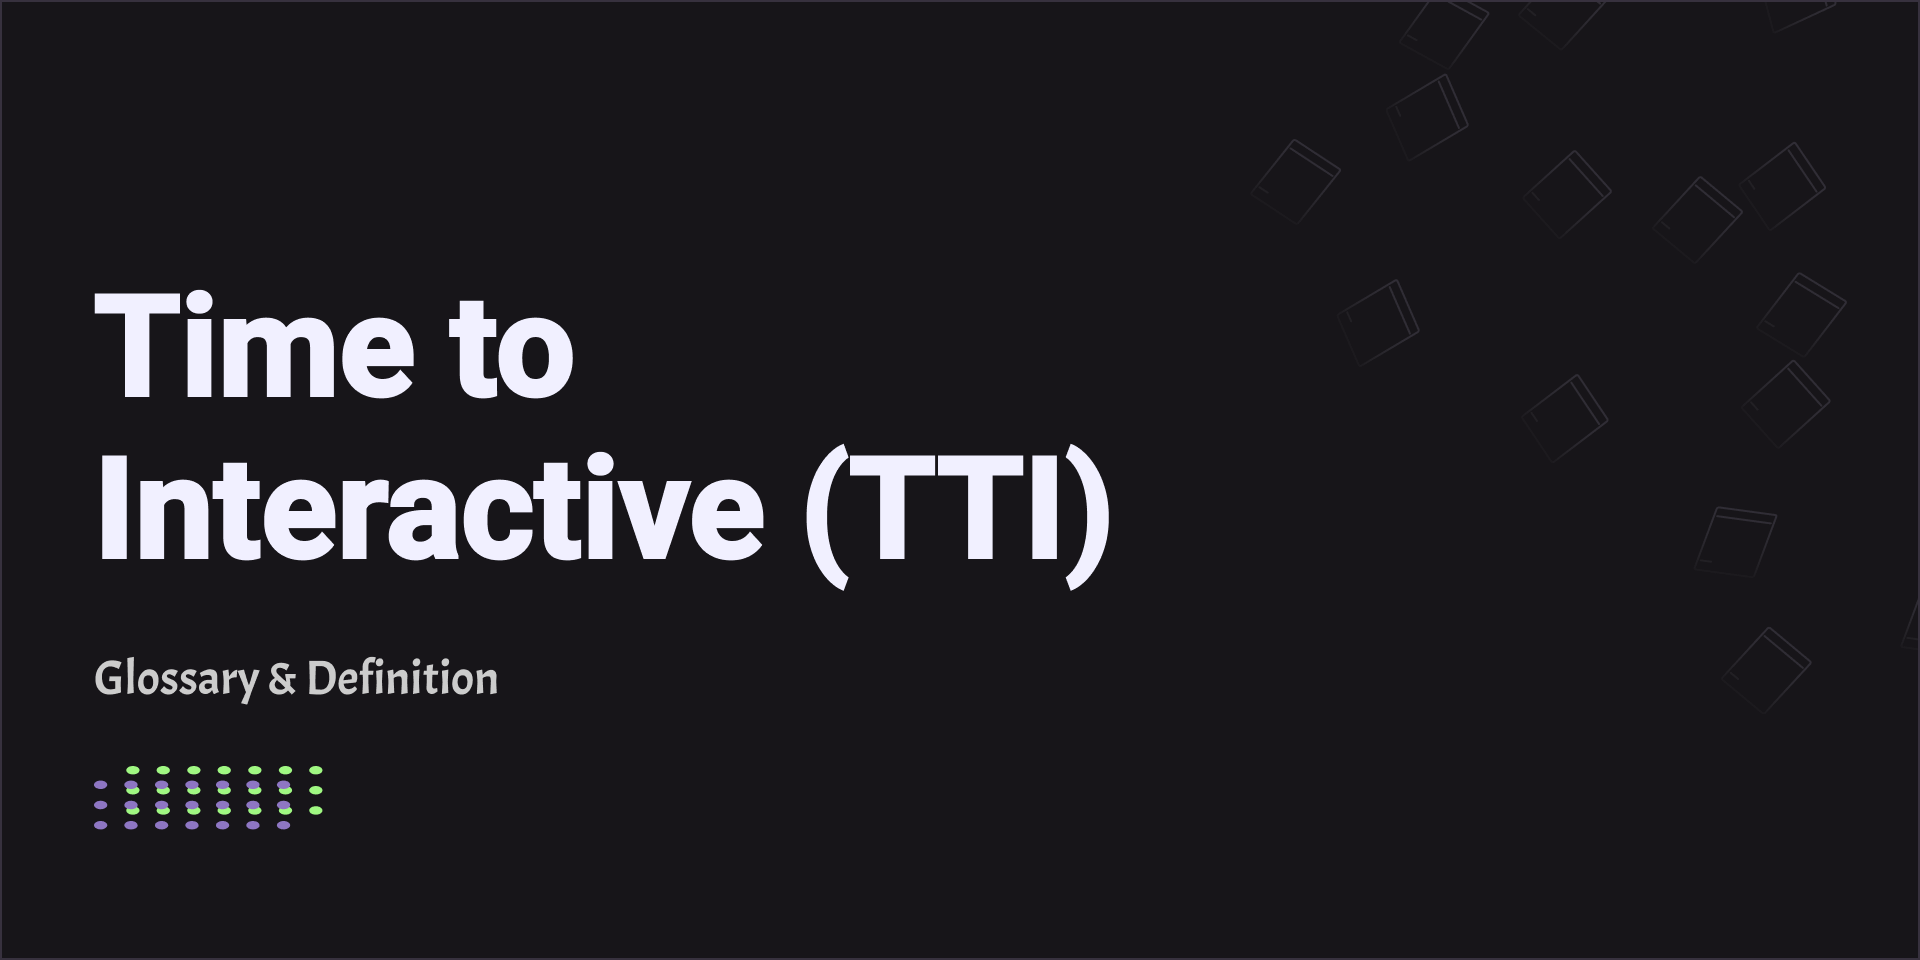 Time to Interactive (TTI)